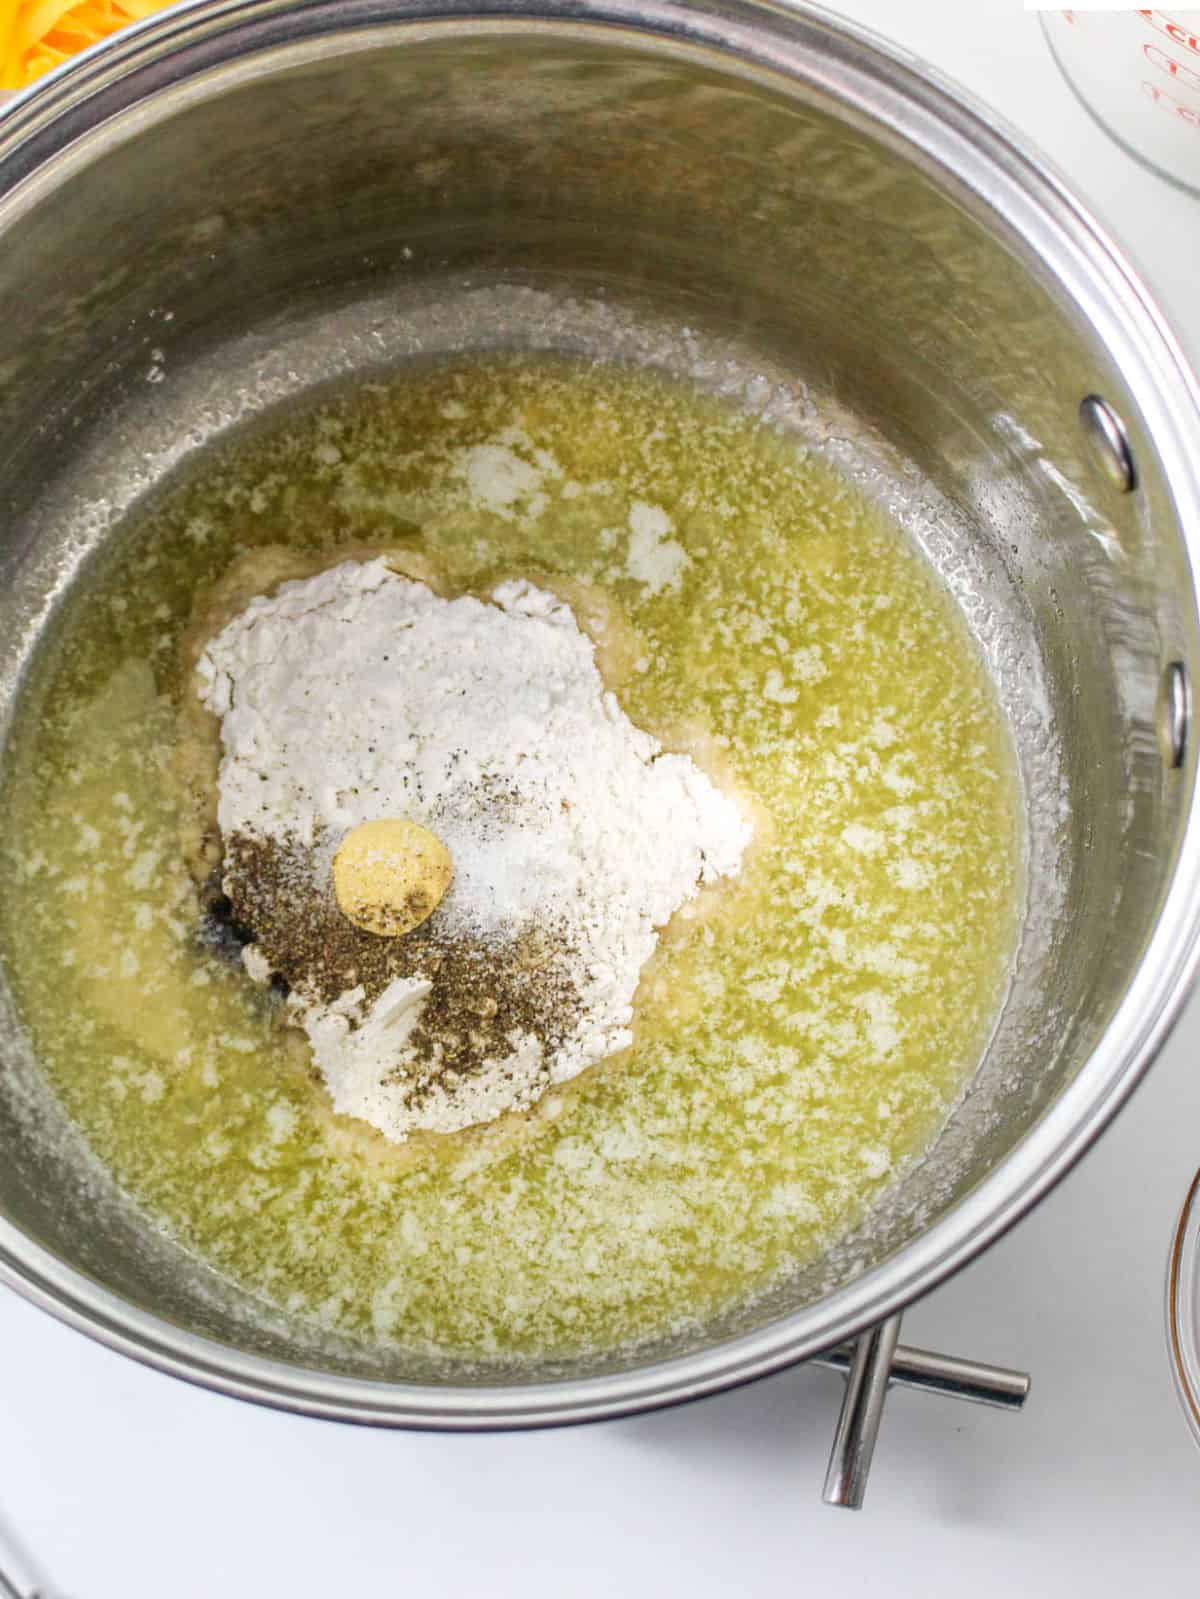 flour and seasonings added to melted butter for a roux.